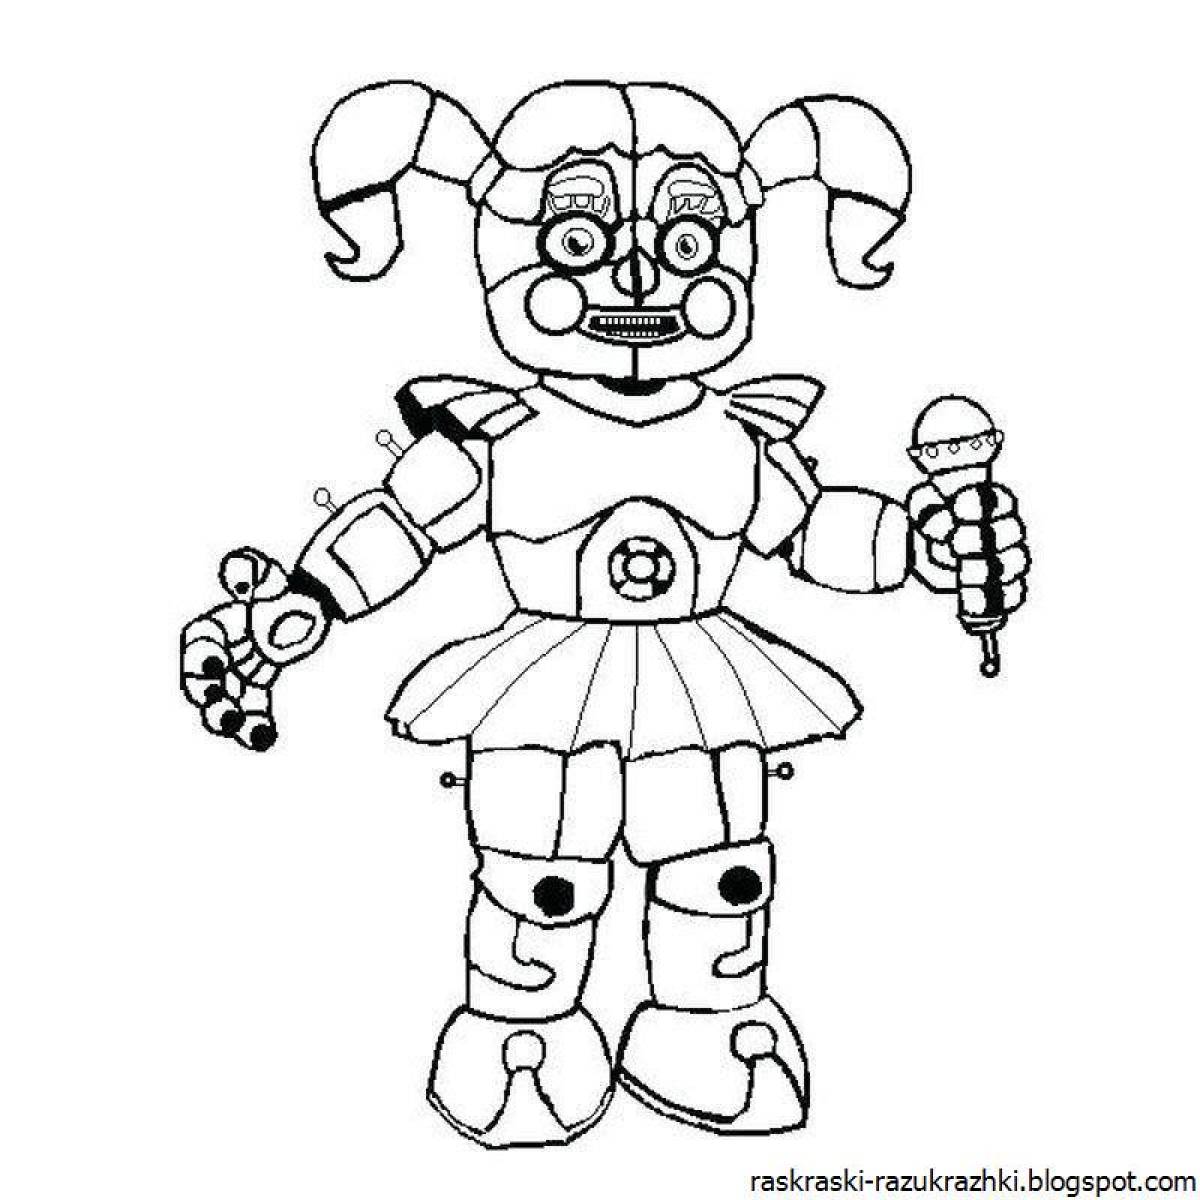 Colorful animatronics coloring book for kids